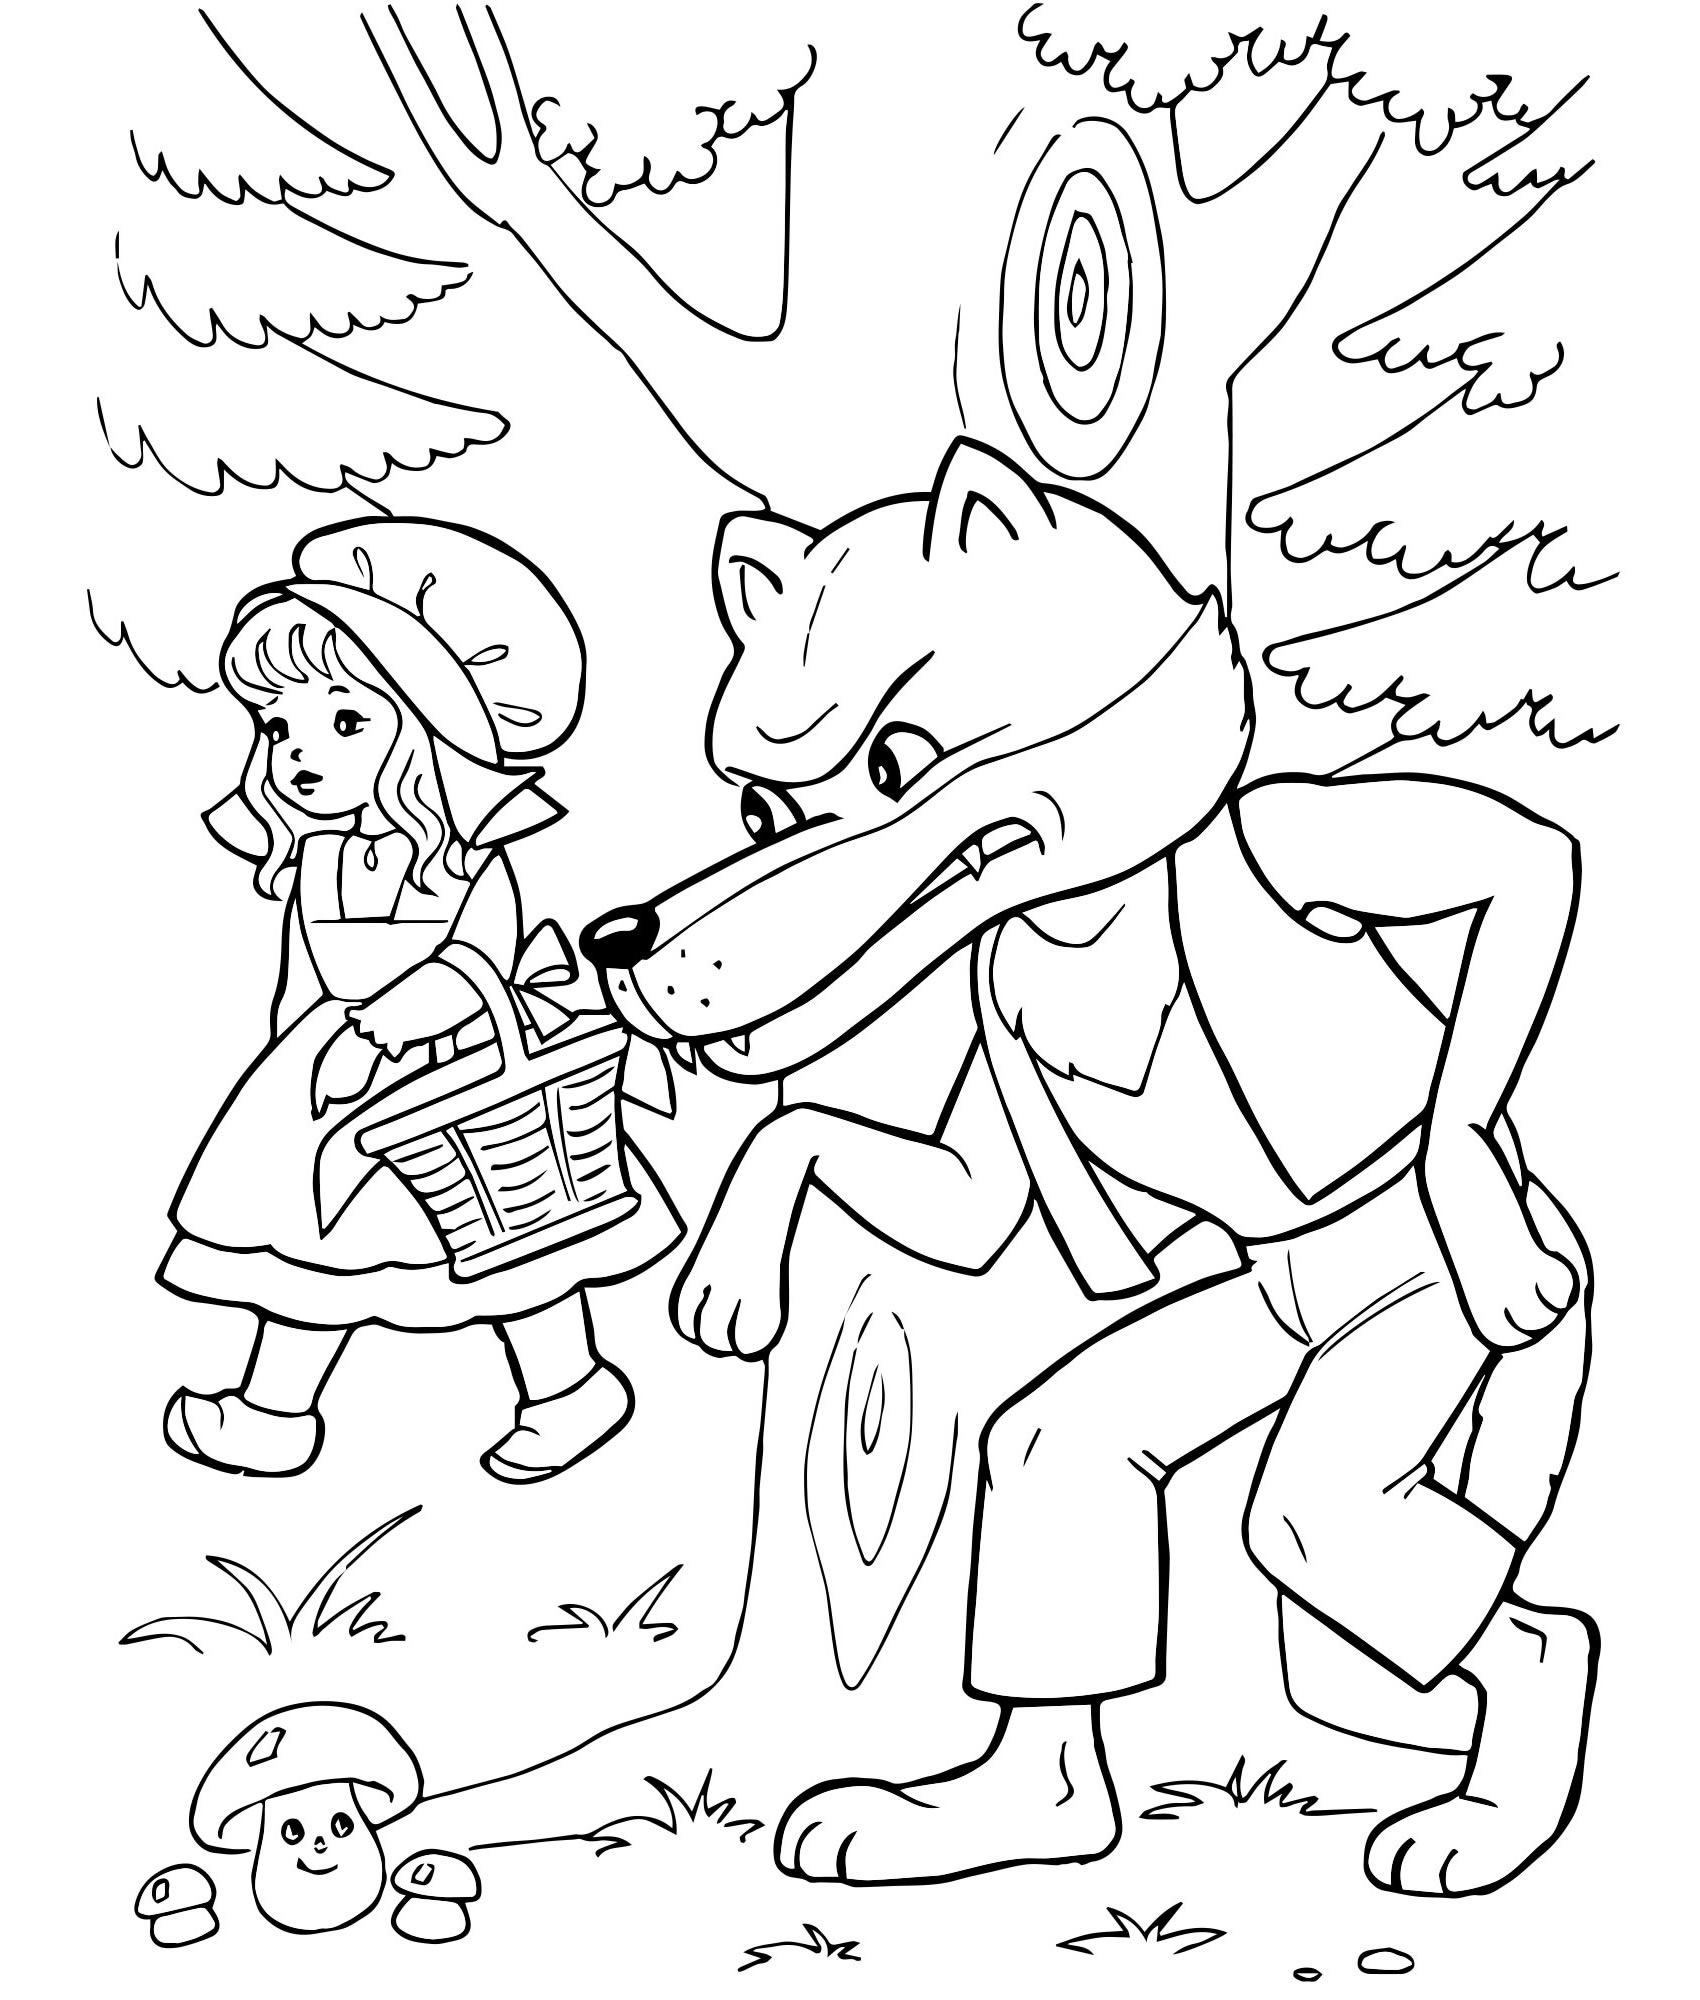 Fancy gray wolf and Little Red Riding Hood coloring book